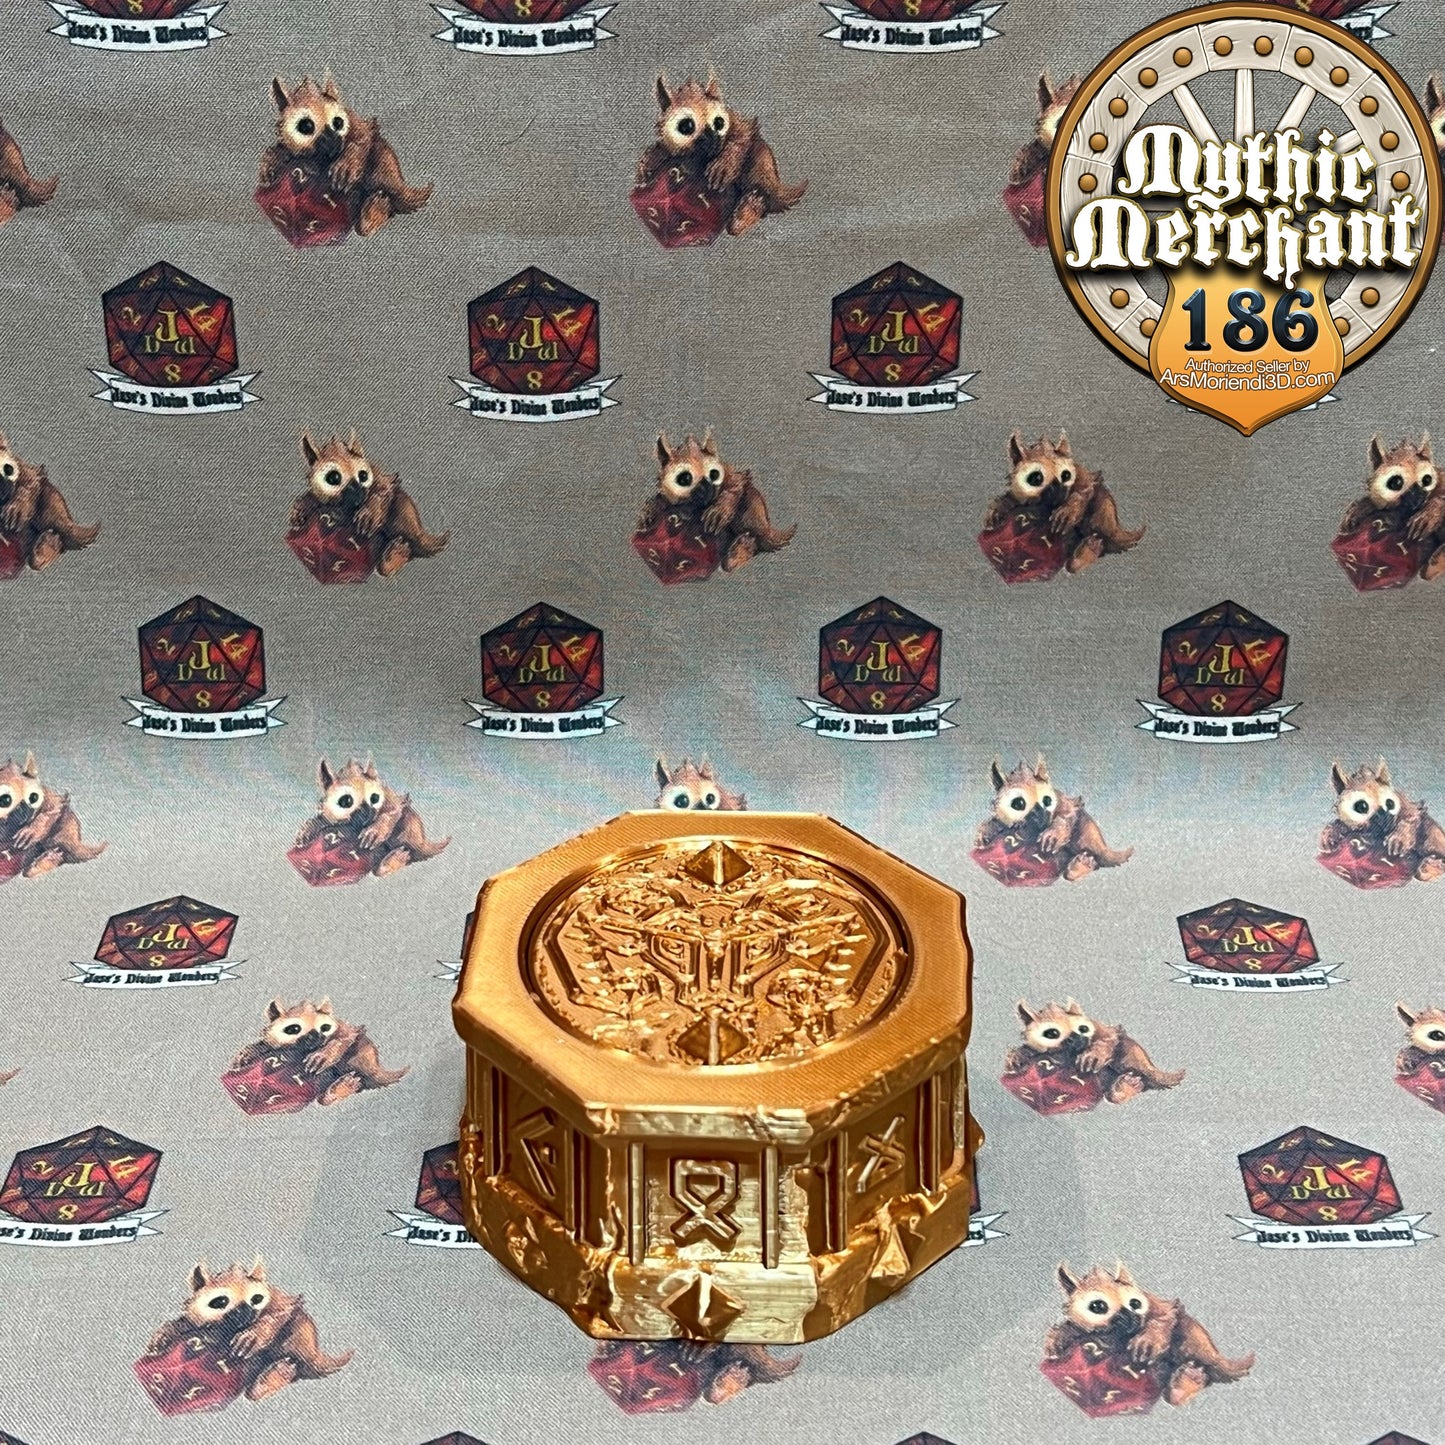 Dwarf Dice Case from Ars Moriendi 3D - Dungeons and Dragons, Pathfinder, TTRPG, Dice Cup/Roller